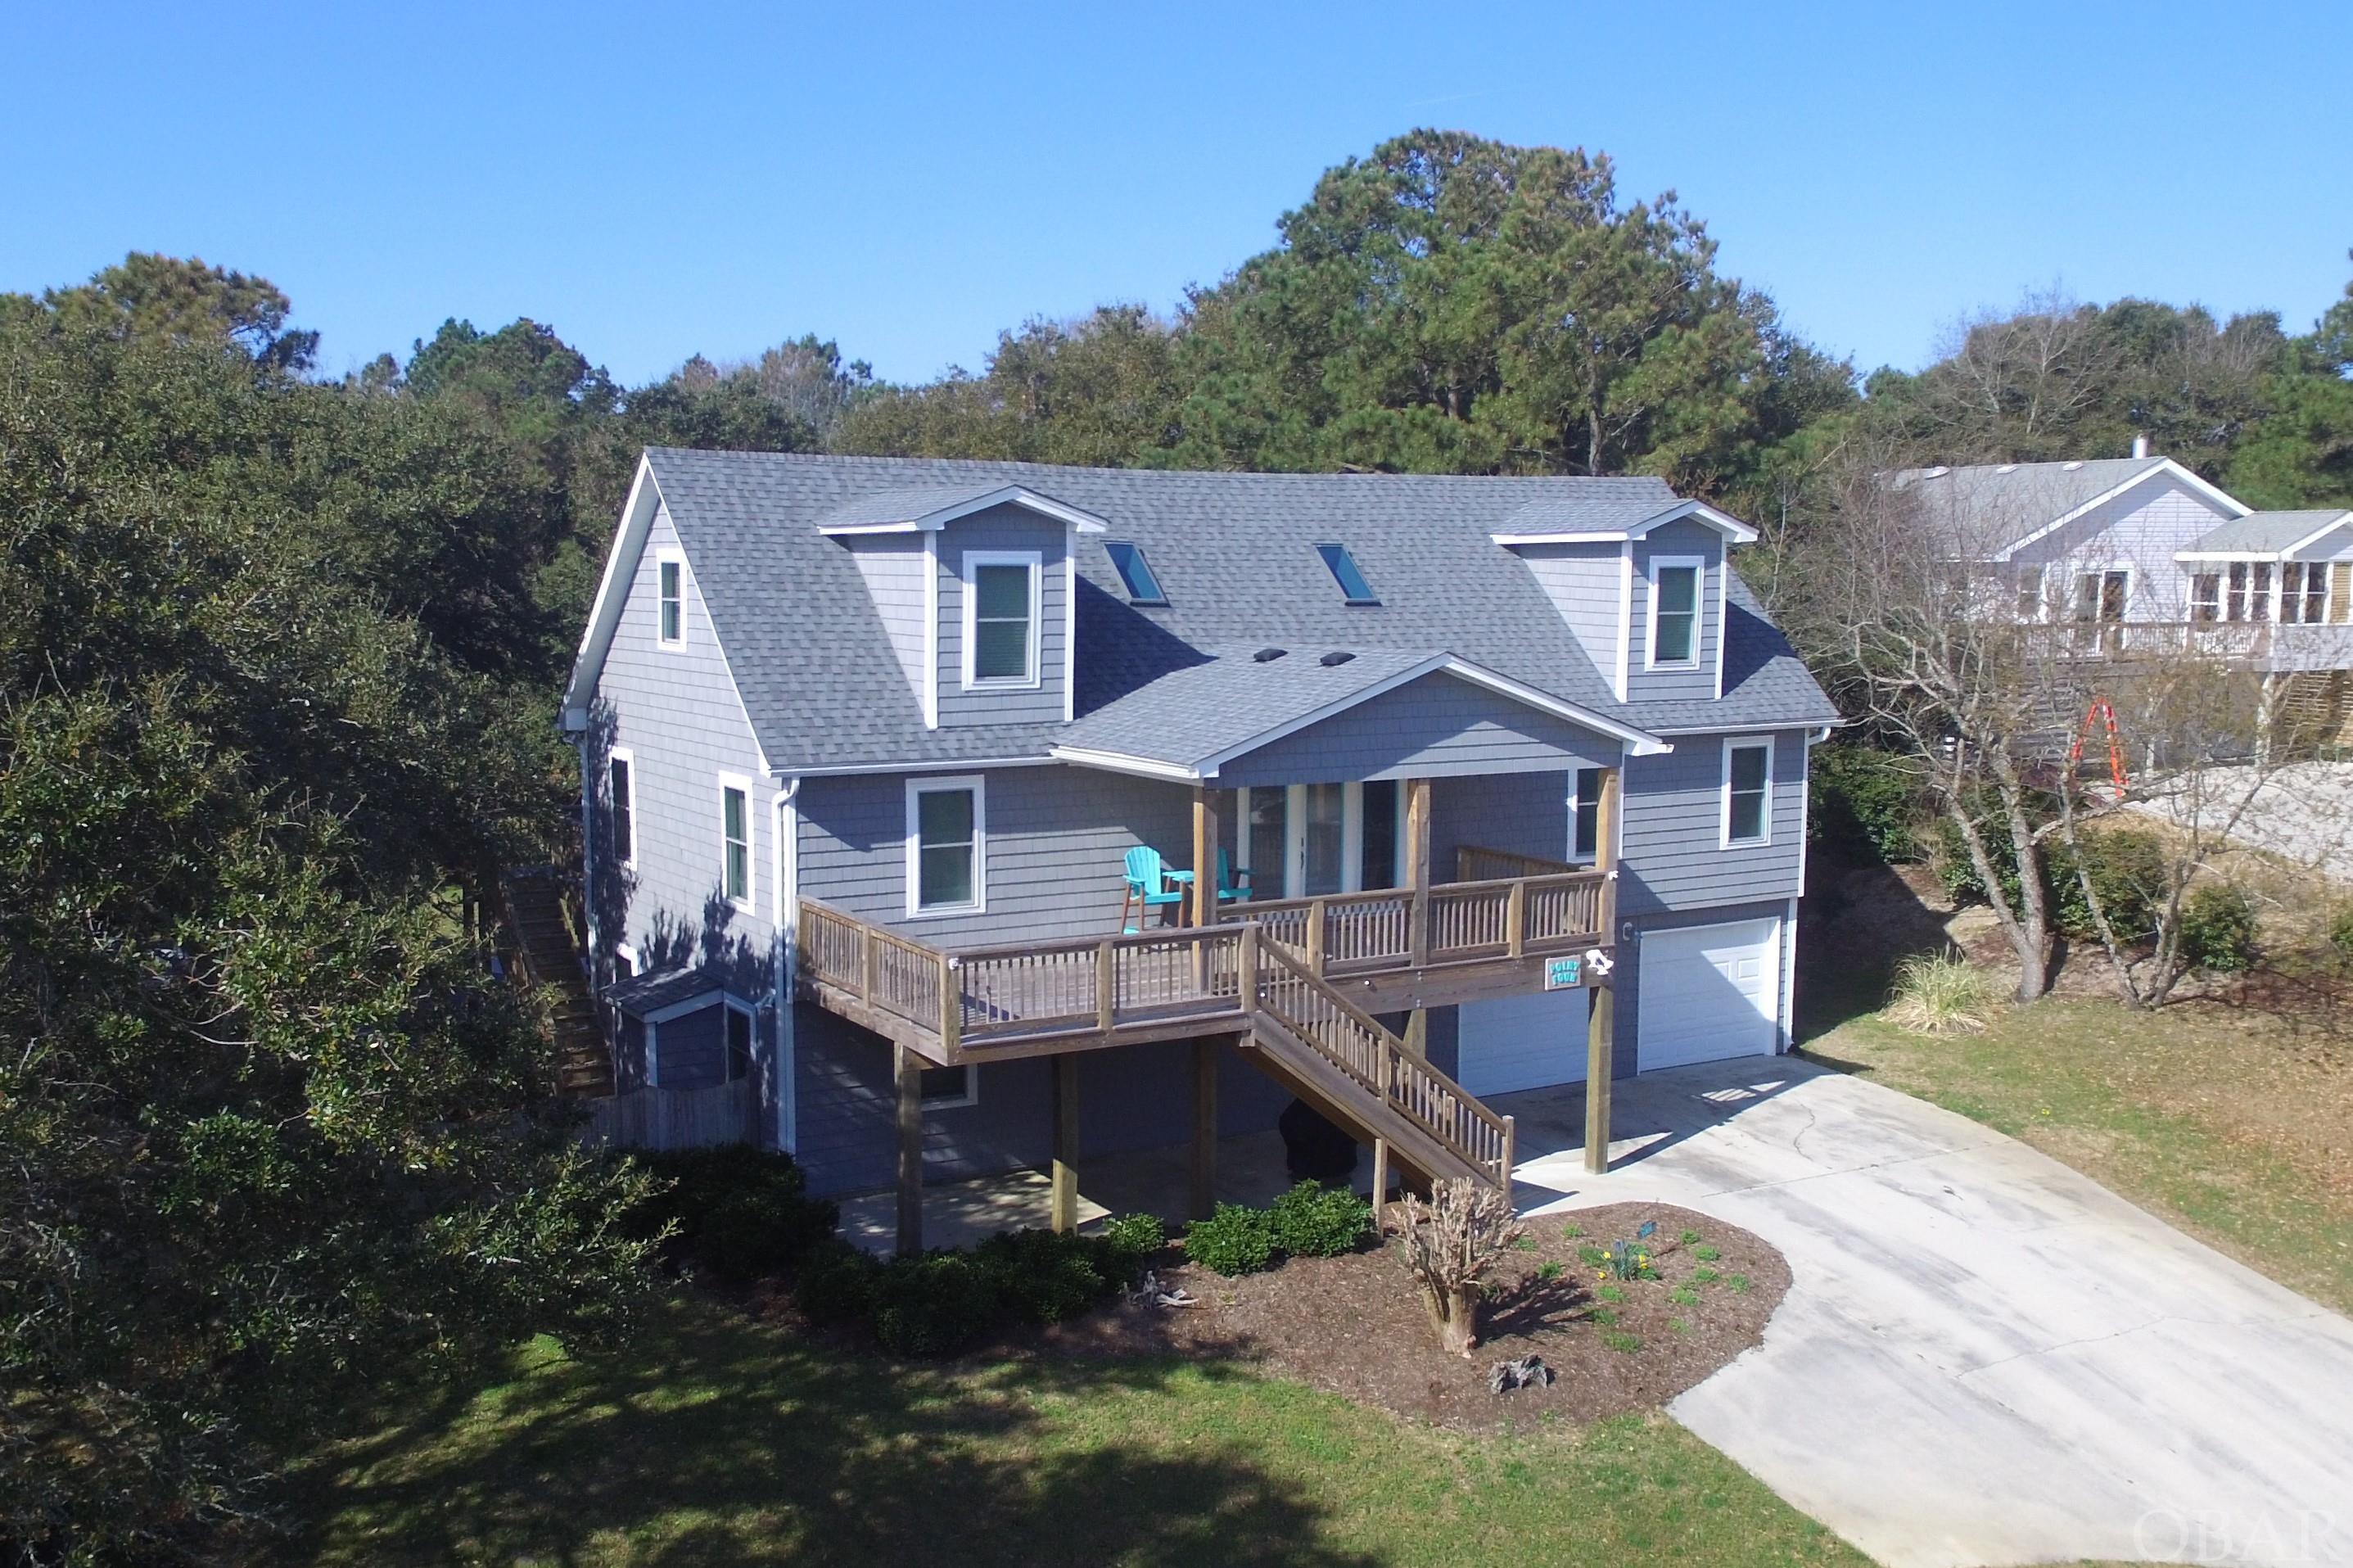 This second home is located in an ideal OBX location near both the ocean and sound accesses. Besides the location you'll love the high elevation, and large, private lot. The home was completely re-done on the outside as well as many new interior features. Many of these improvements were completed by one of the top builders on the Outer Banks, Sandmark Construction. These updates include impact resistant glass windows and sliding doors, a new roof and siding. Living room, kitchen the master bedroom, two other bedrooms and a bath are all on the mid-level so you can live on one floor. From the first-floor game room, you have quick access to the large pool with new vinyl liner, private back yard and two car garage.  The top floor has two super large bedrooms, a bath and a huge loft.  Sold mostly furnished, all this home needs are your own personal touches.  It would be a great second home, vacation rental or primary residence.  Ask your  agent for extensive list of information in Associated Documents.  This includes recent improvements, insurance info, survey, maintenace and utility expenses.